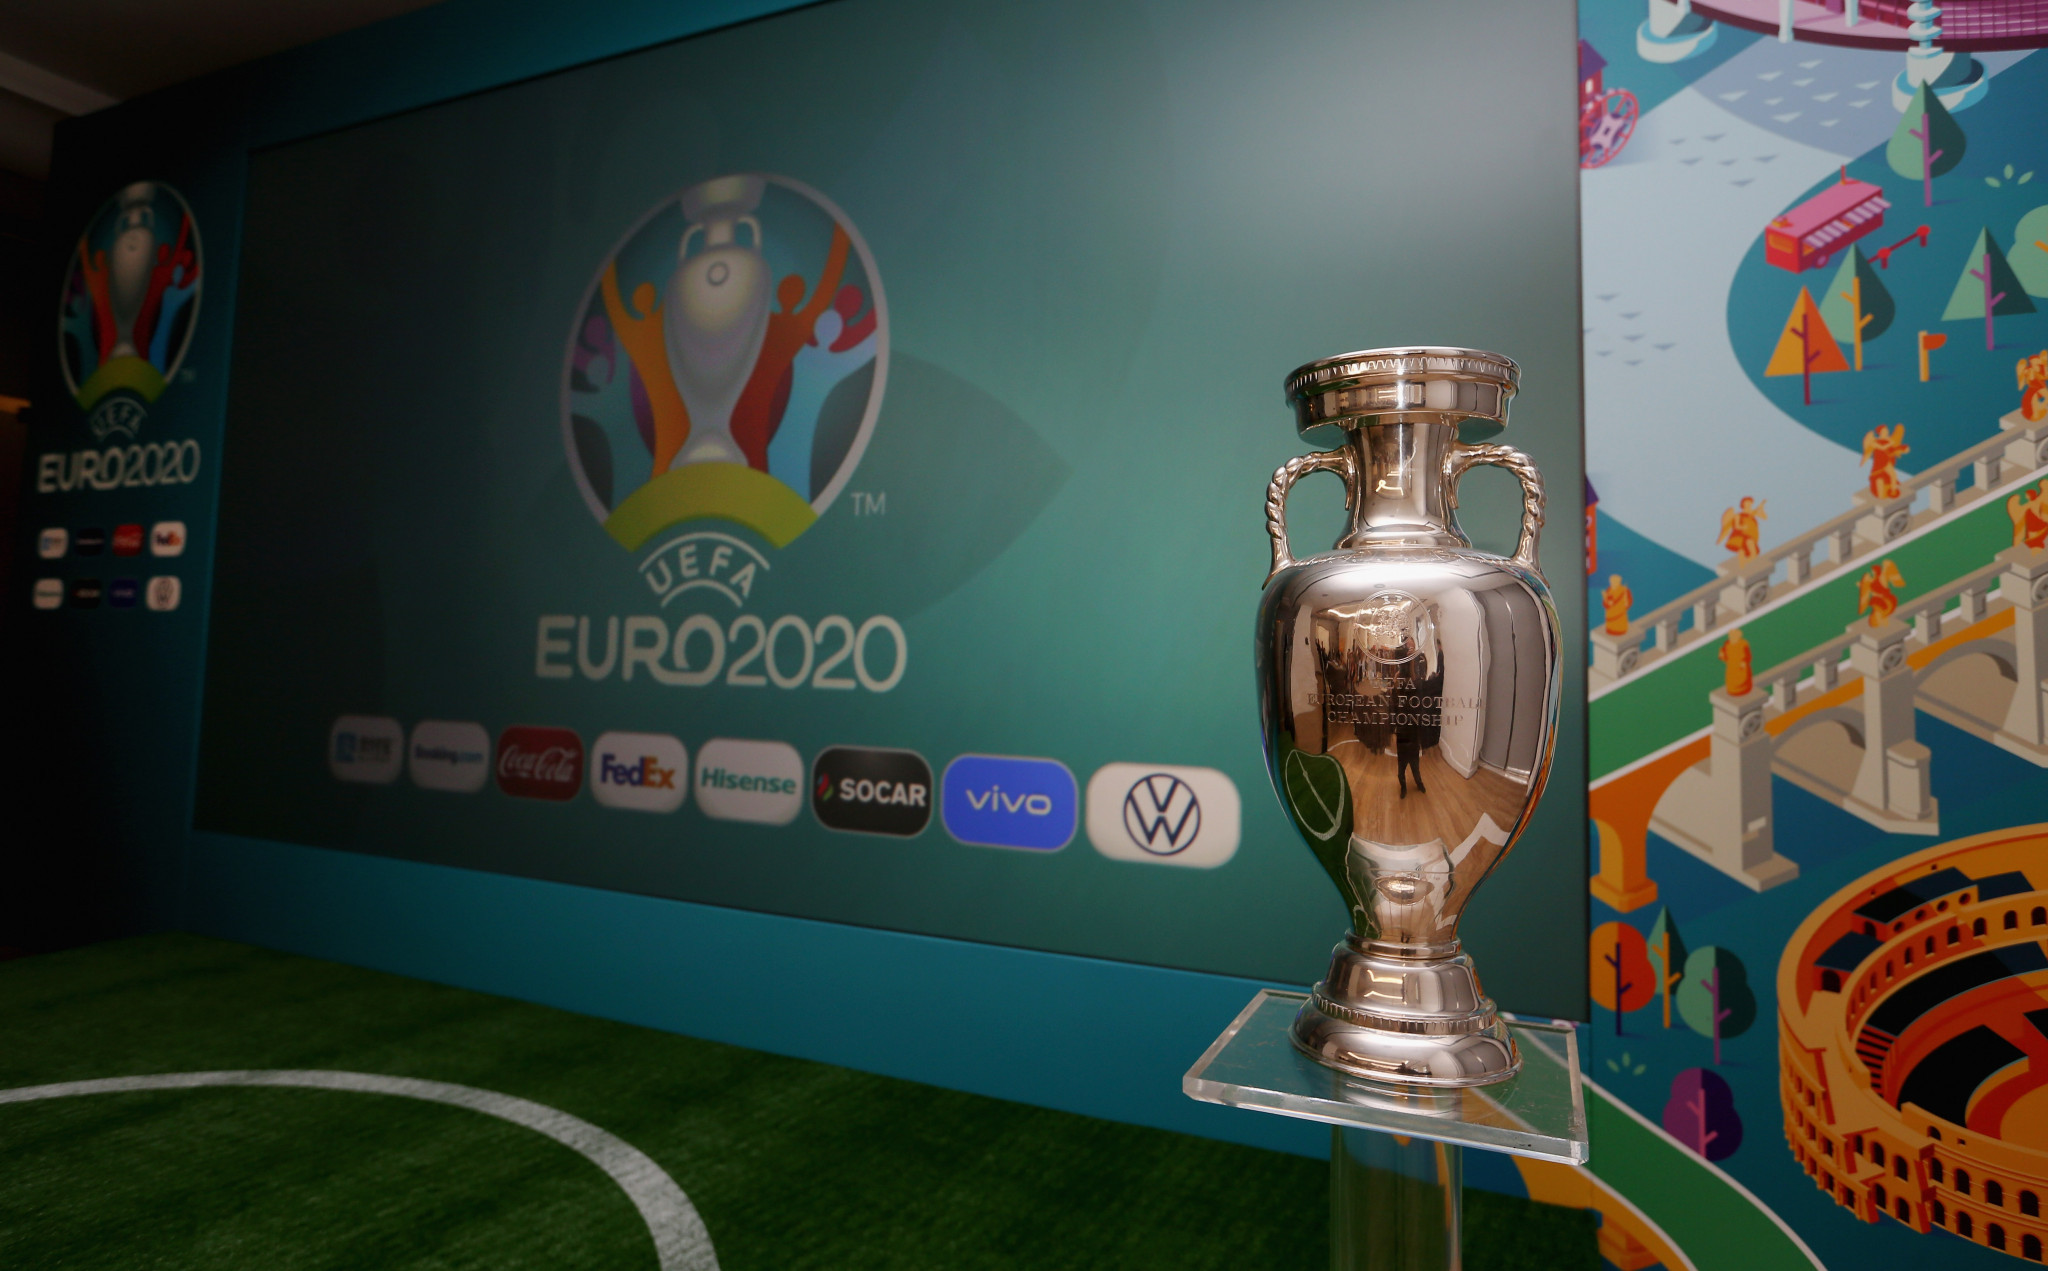 Russia will remain as one of the hosts of UEFA Euro 2020 ©Getty Images